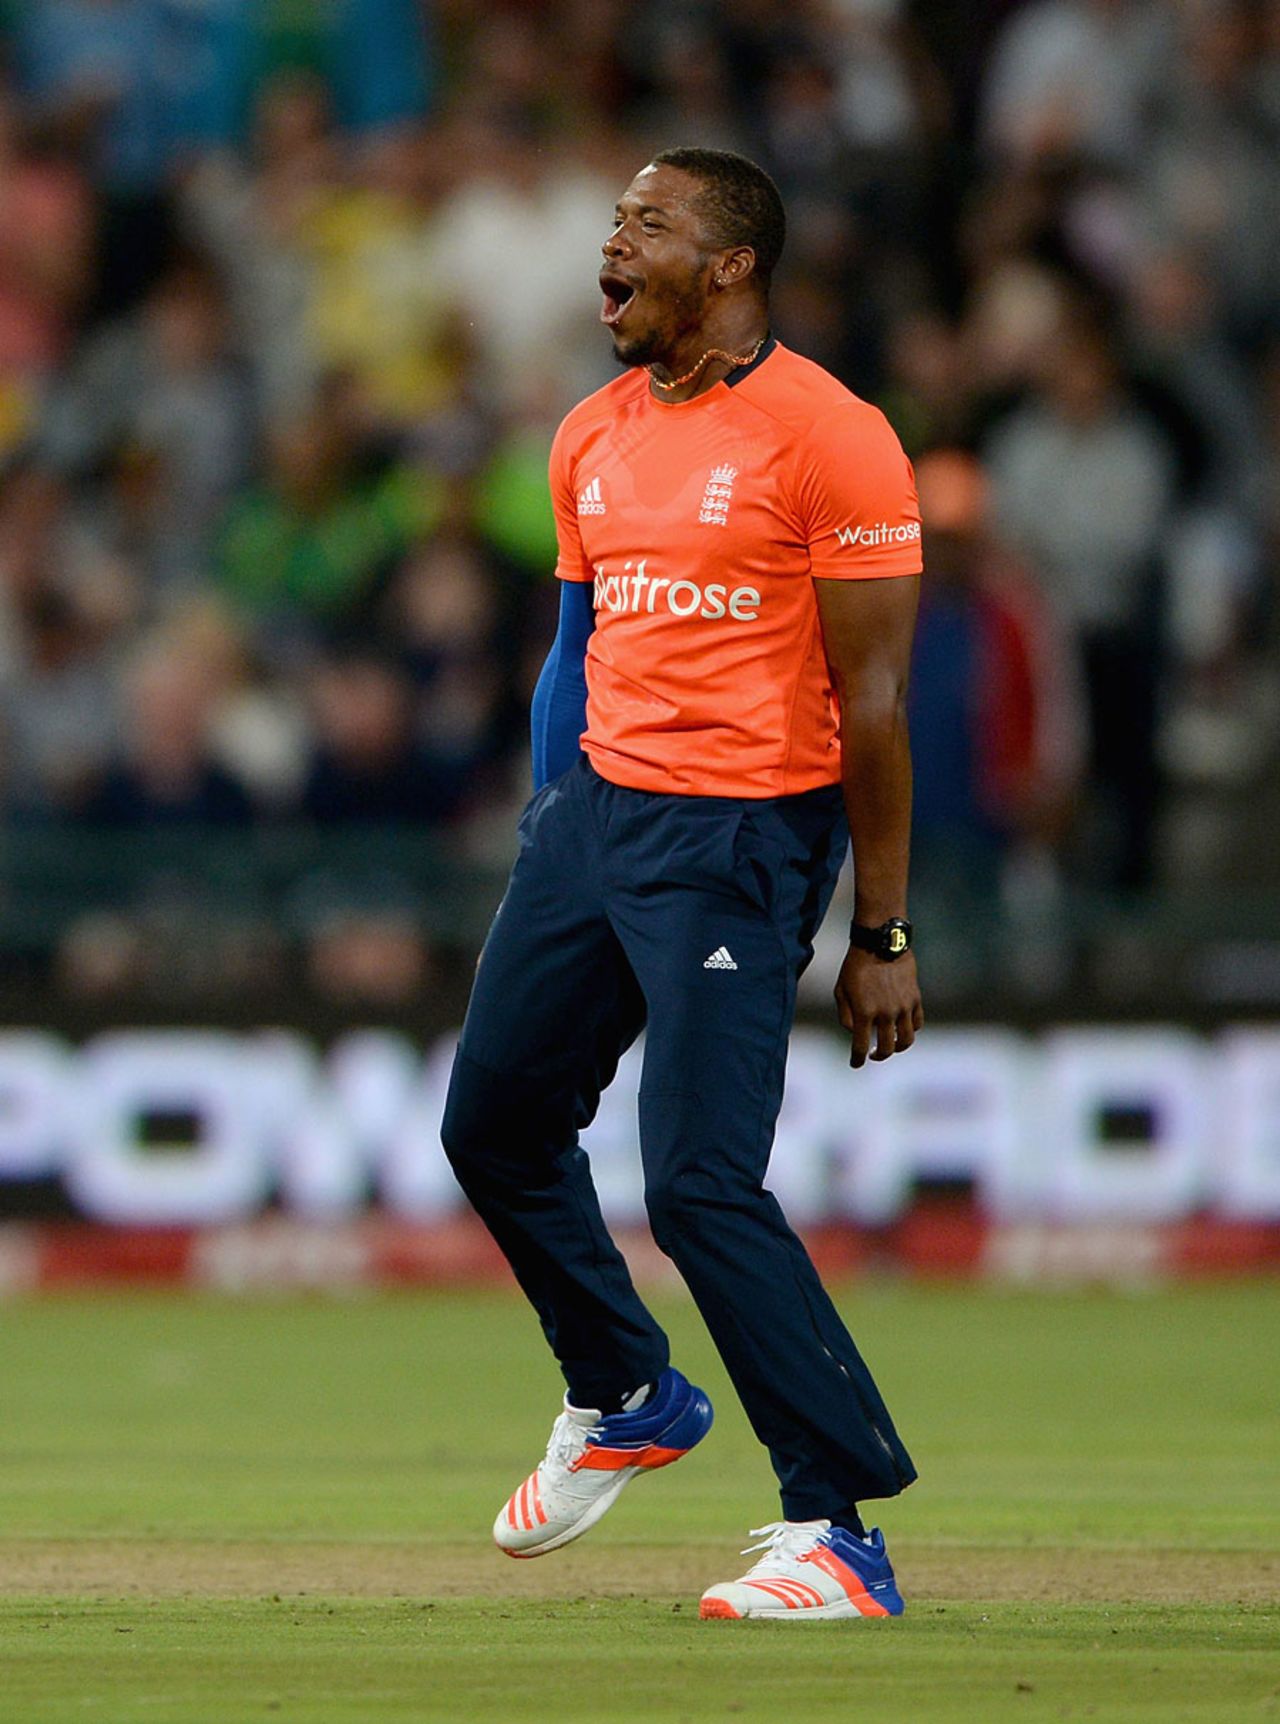 Chris Jordan removed AB de Villiers in his first over, South Africa v England, 1st T20, Cape Town, February 19, 2016